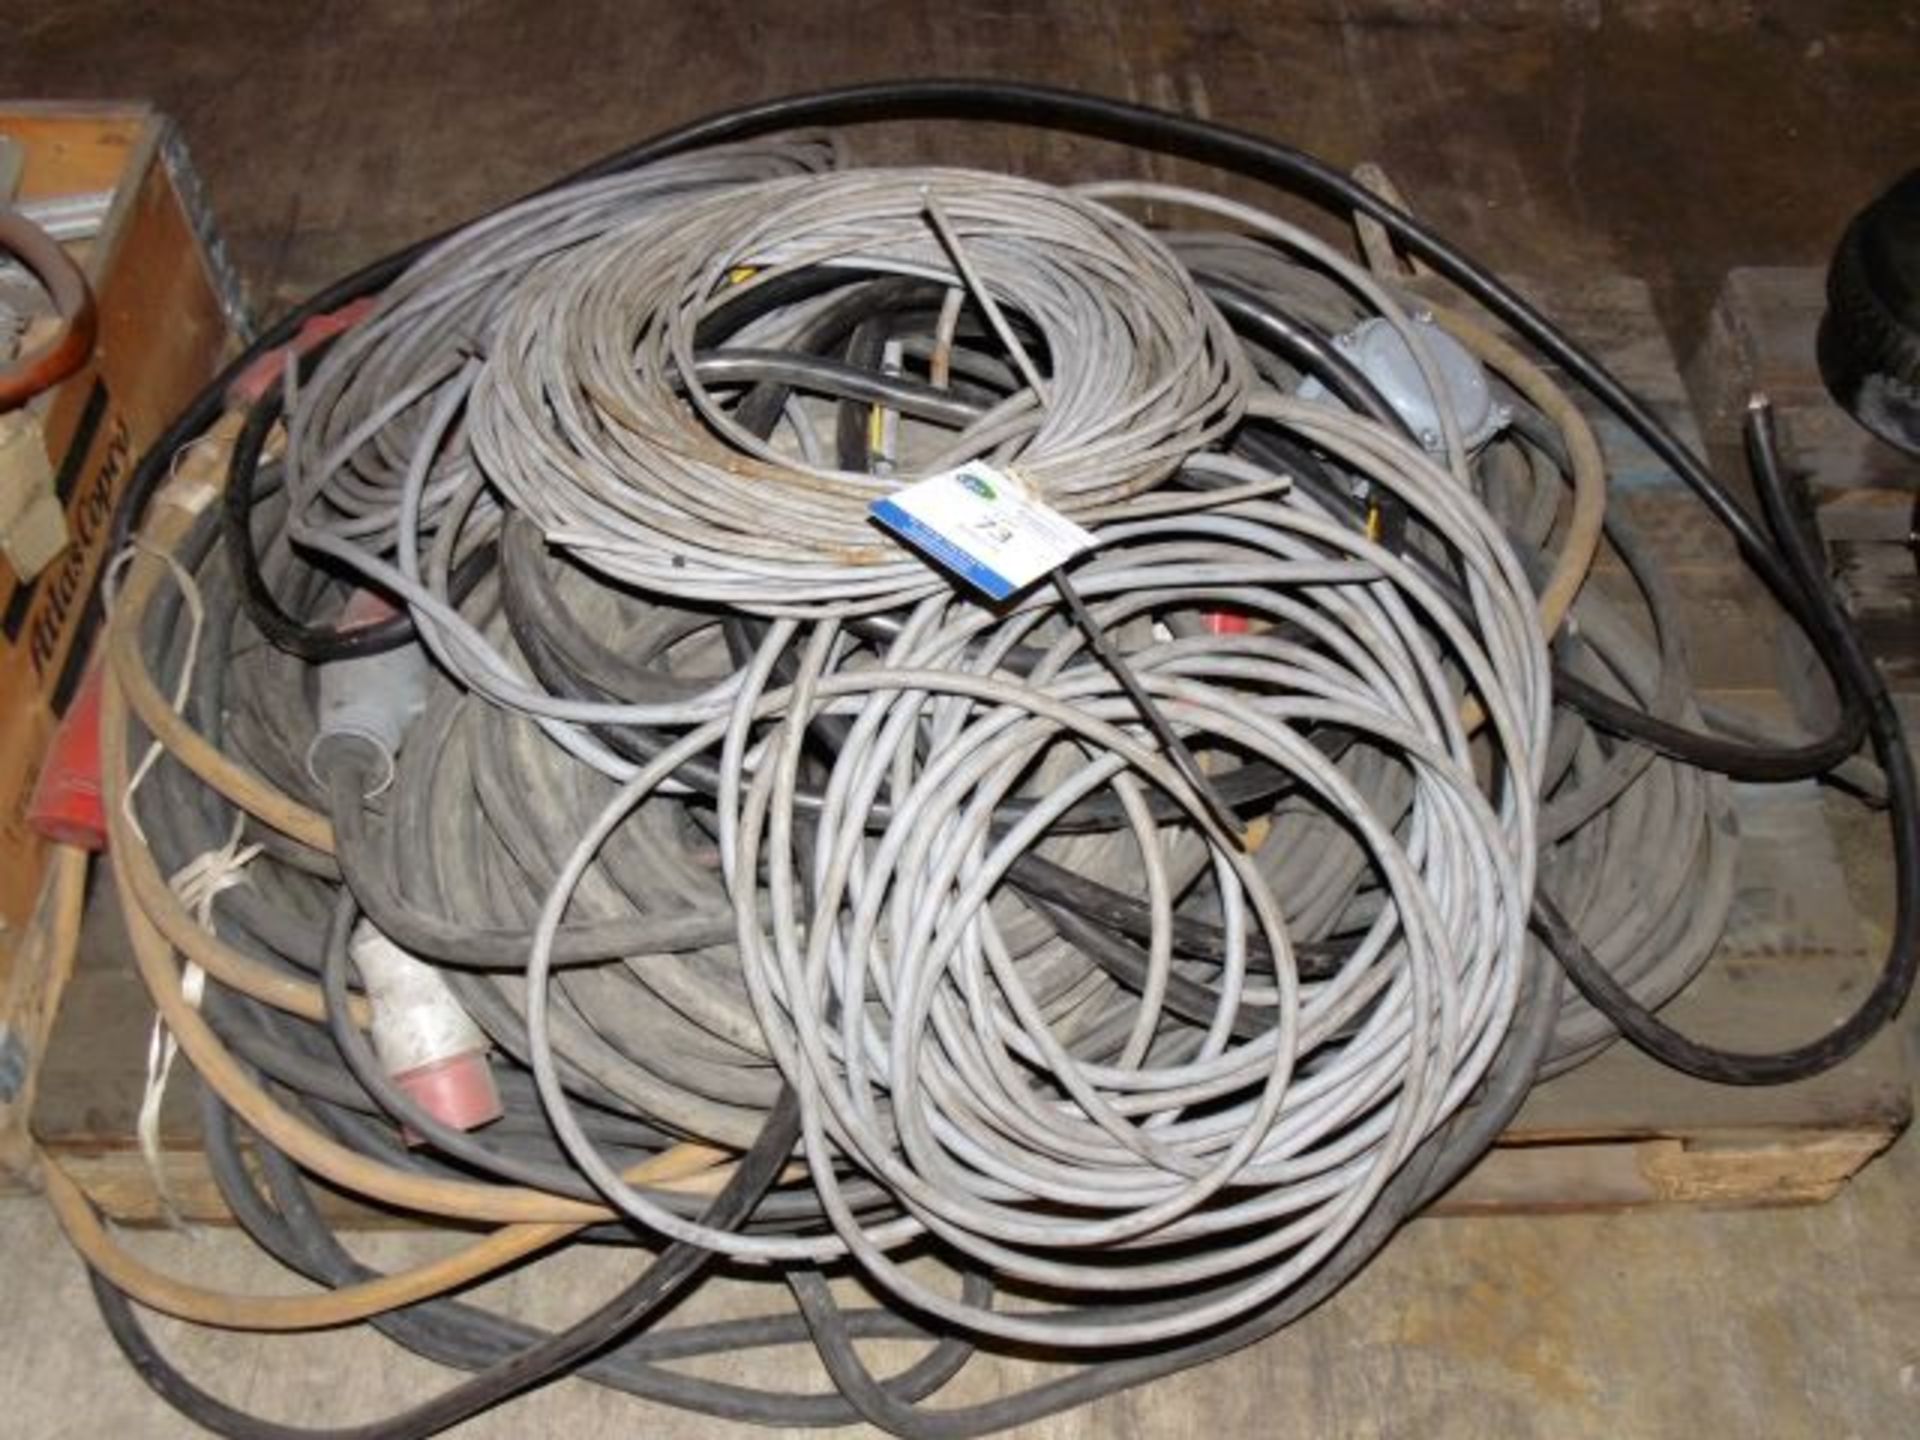 * Pallet of assorted Electrical Cable. Loaded onto Buyer's Transport